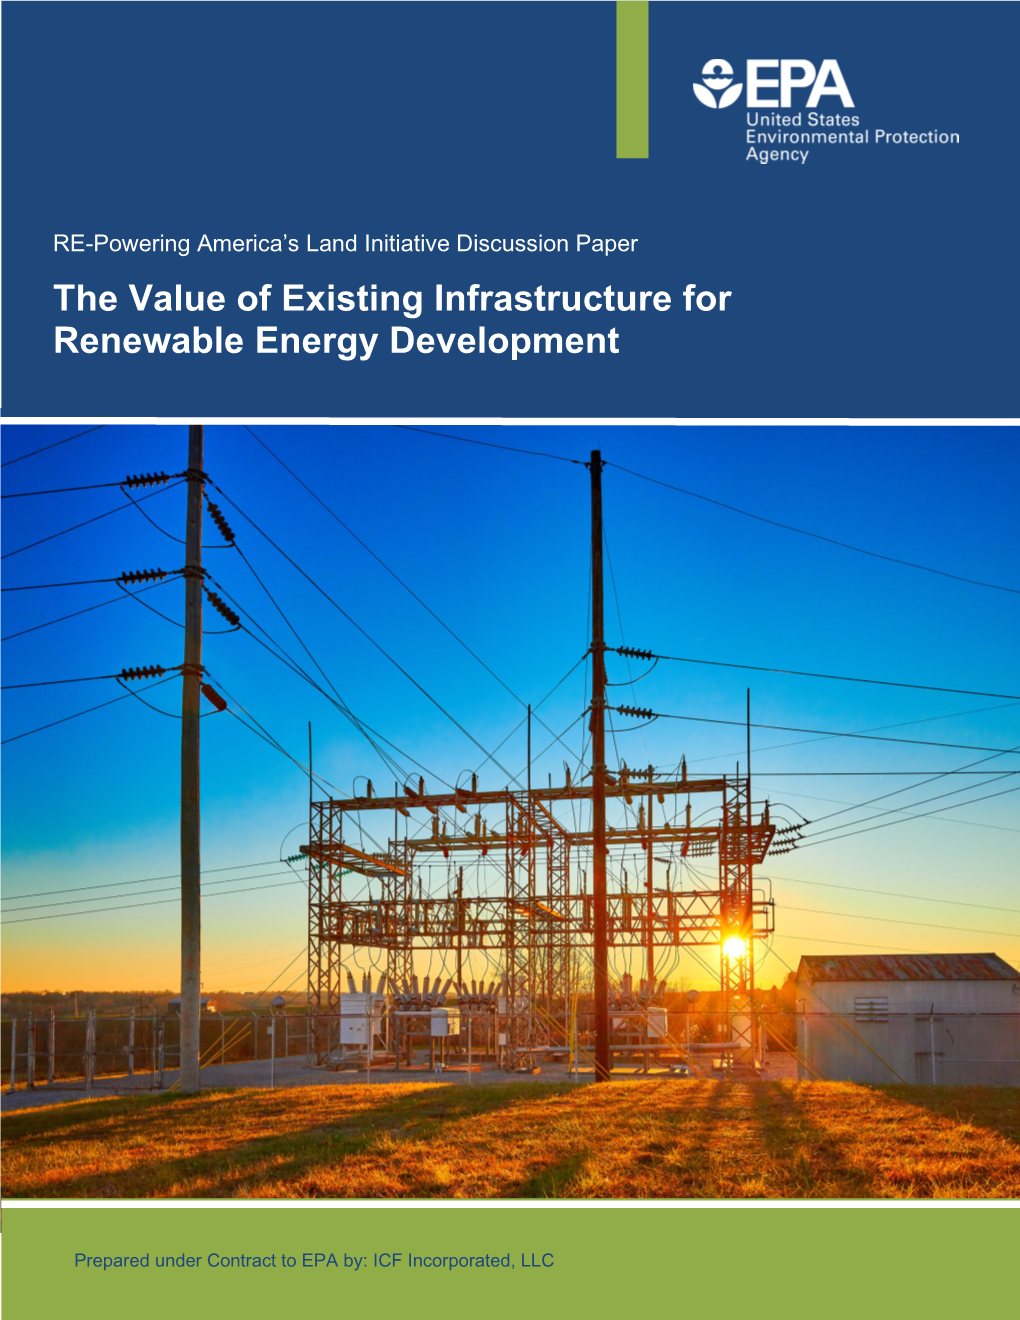 The Value of Existing Infrastructure for Renewable Energy Development